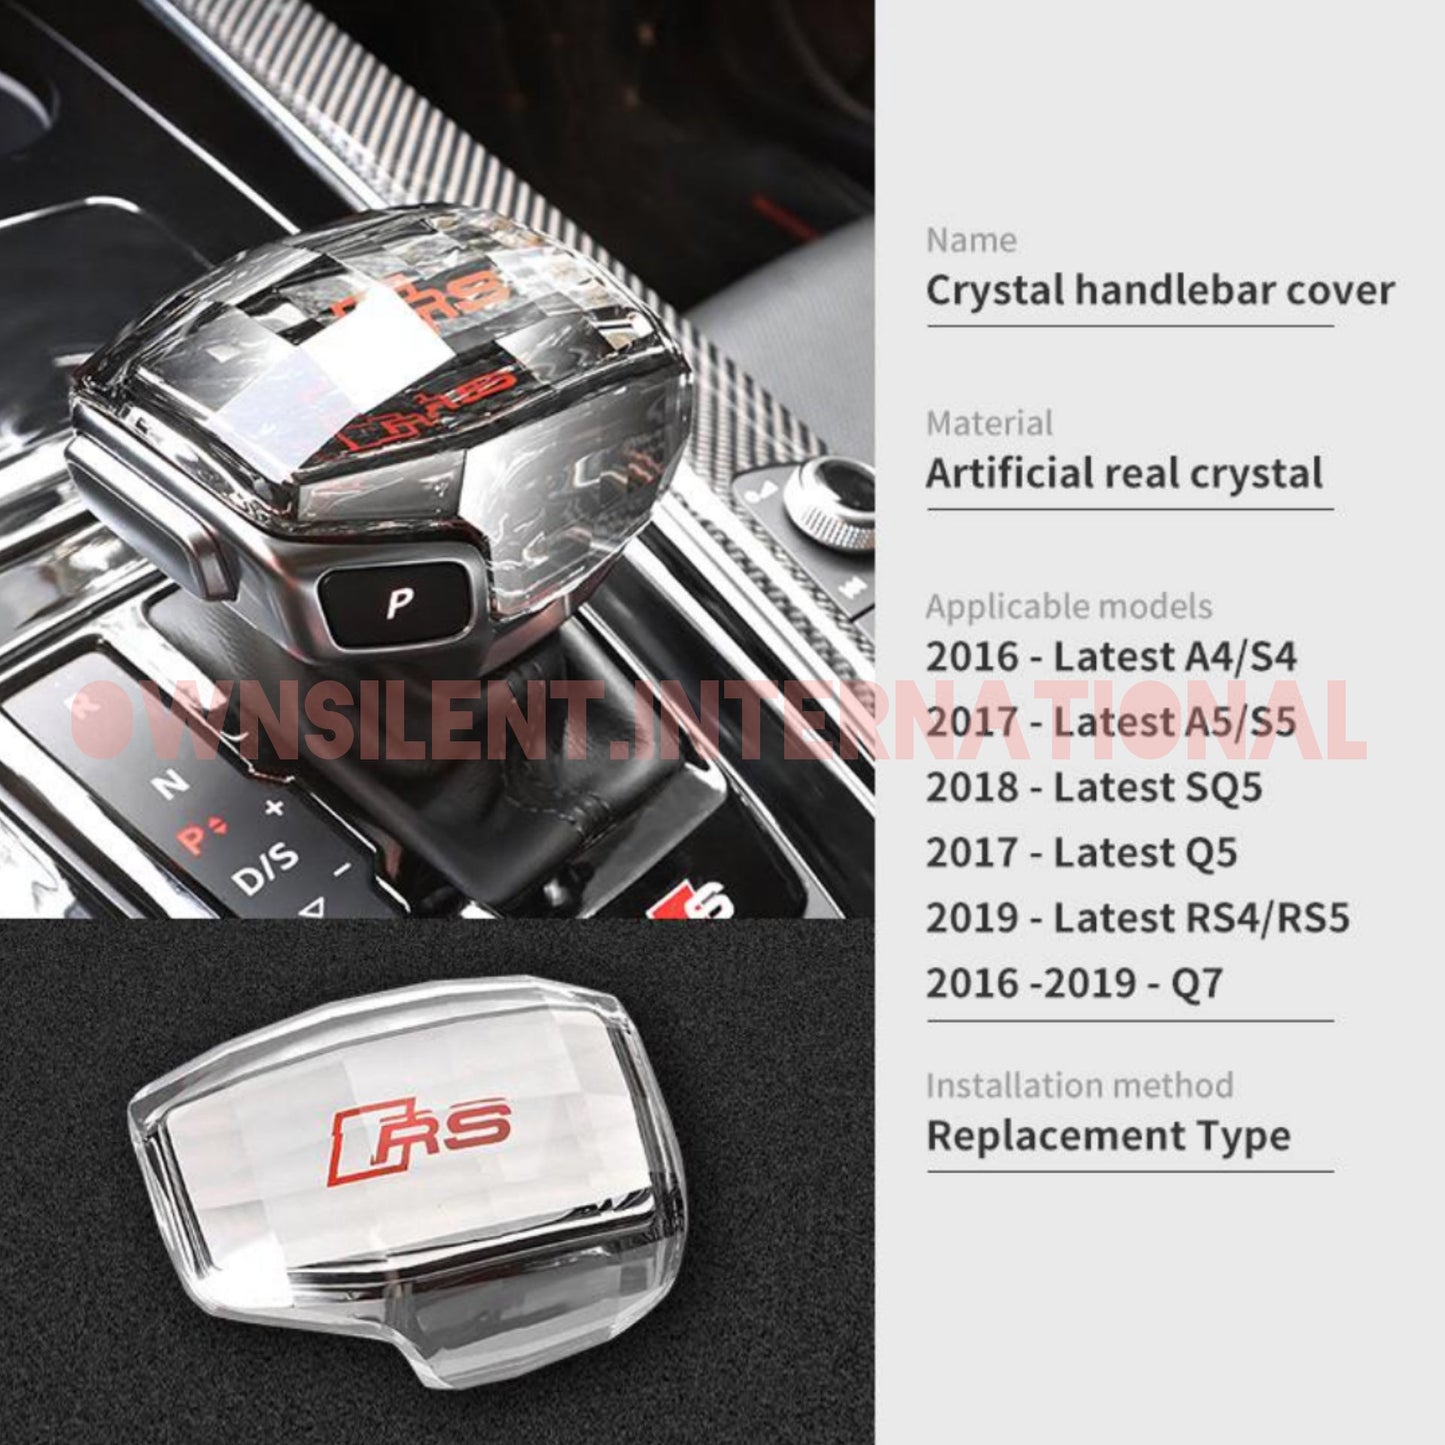 Artificial Real Crystal AUDI 2016+ A4 /A5 / S4 / S5 / SQ5 / S5 / RS4 / RS5 / Q7  Crystal Handlebar Cover Replacement Type